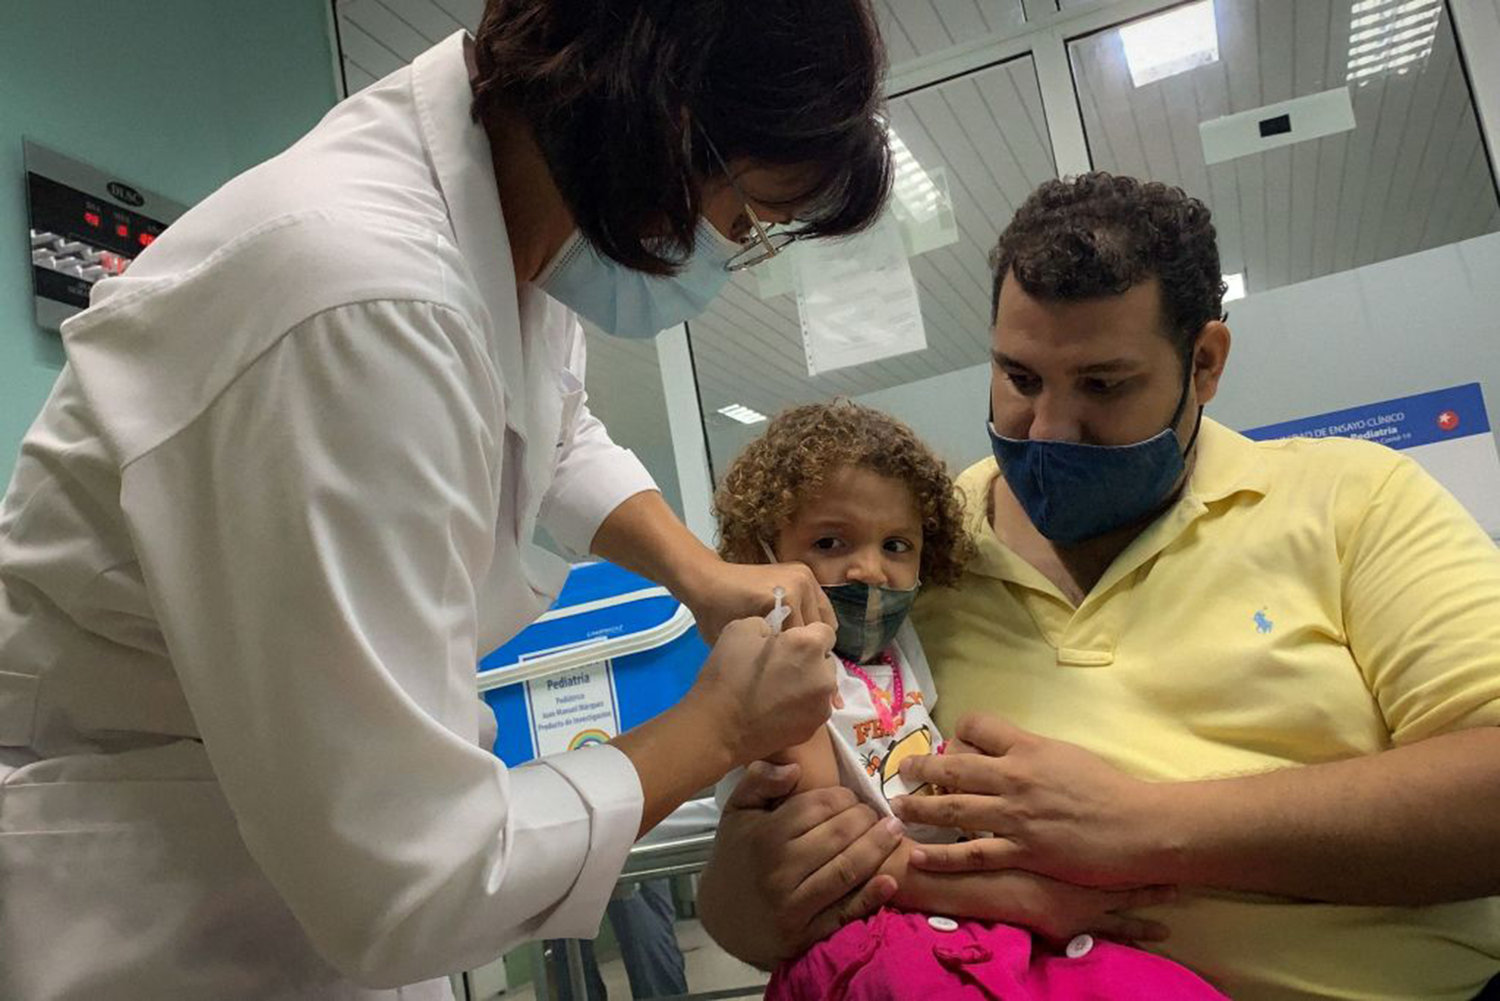 Pedro Montano holds his daughter Roxana Montano, 3, while she is being vaccinated against COVID-19 with Cuban vaccine Soberana Plus, on August 24, 2021 at Juan Manuel Marquez hospital in Havana, as part of the vaccine study in children and adolescents. (Adalberto Roque/AFP via Getty Images/TNS)